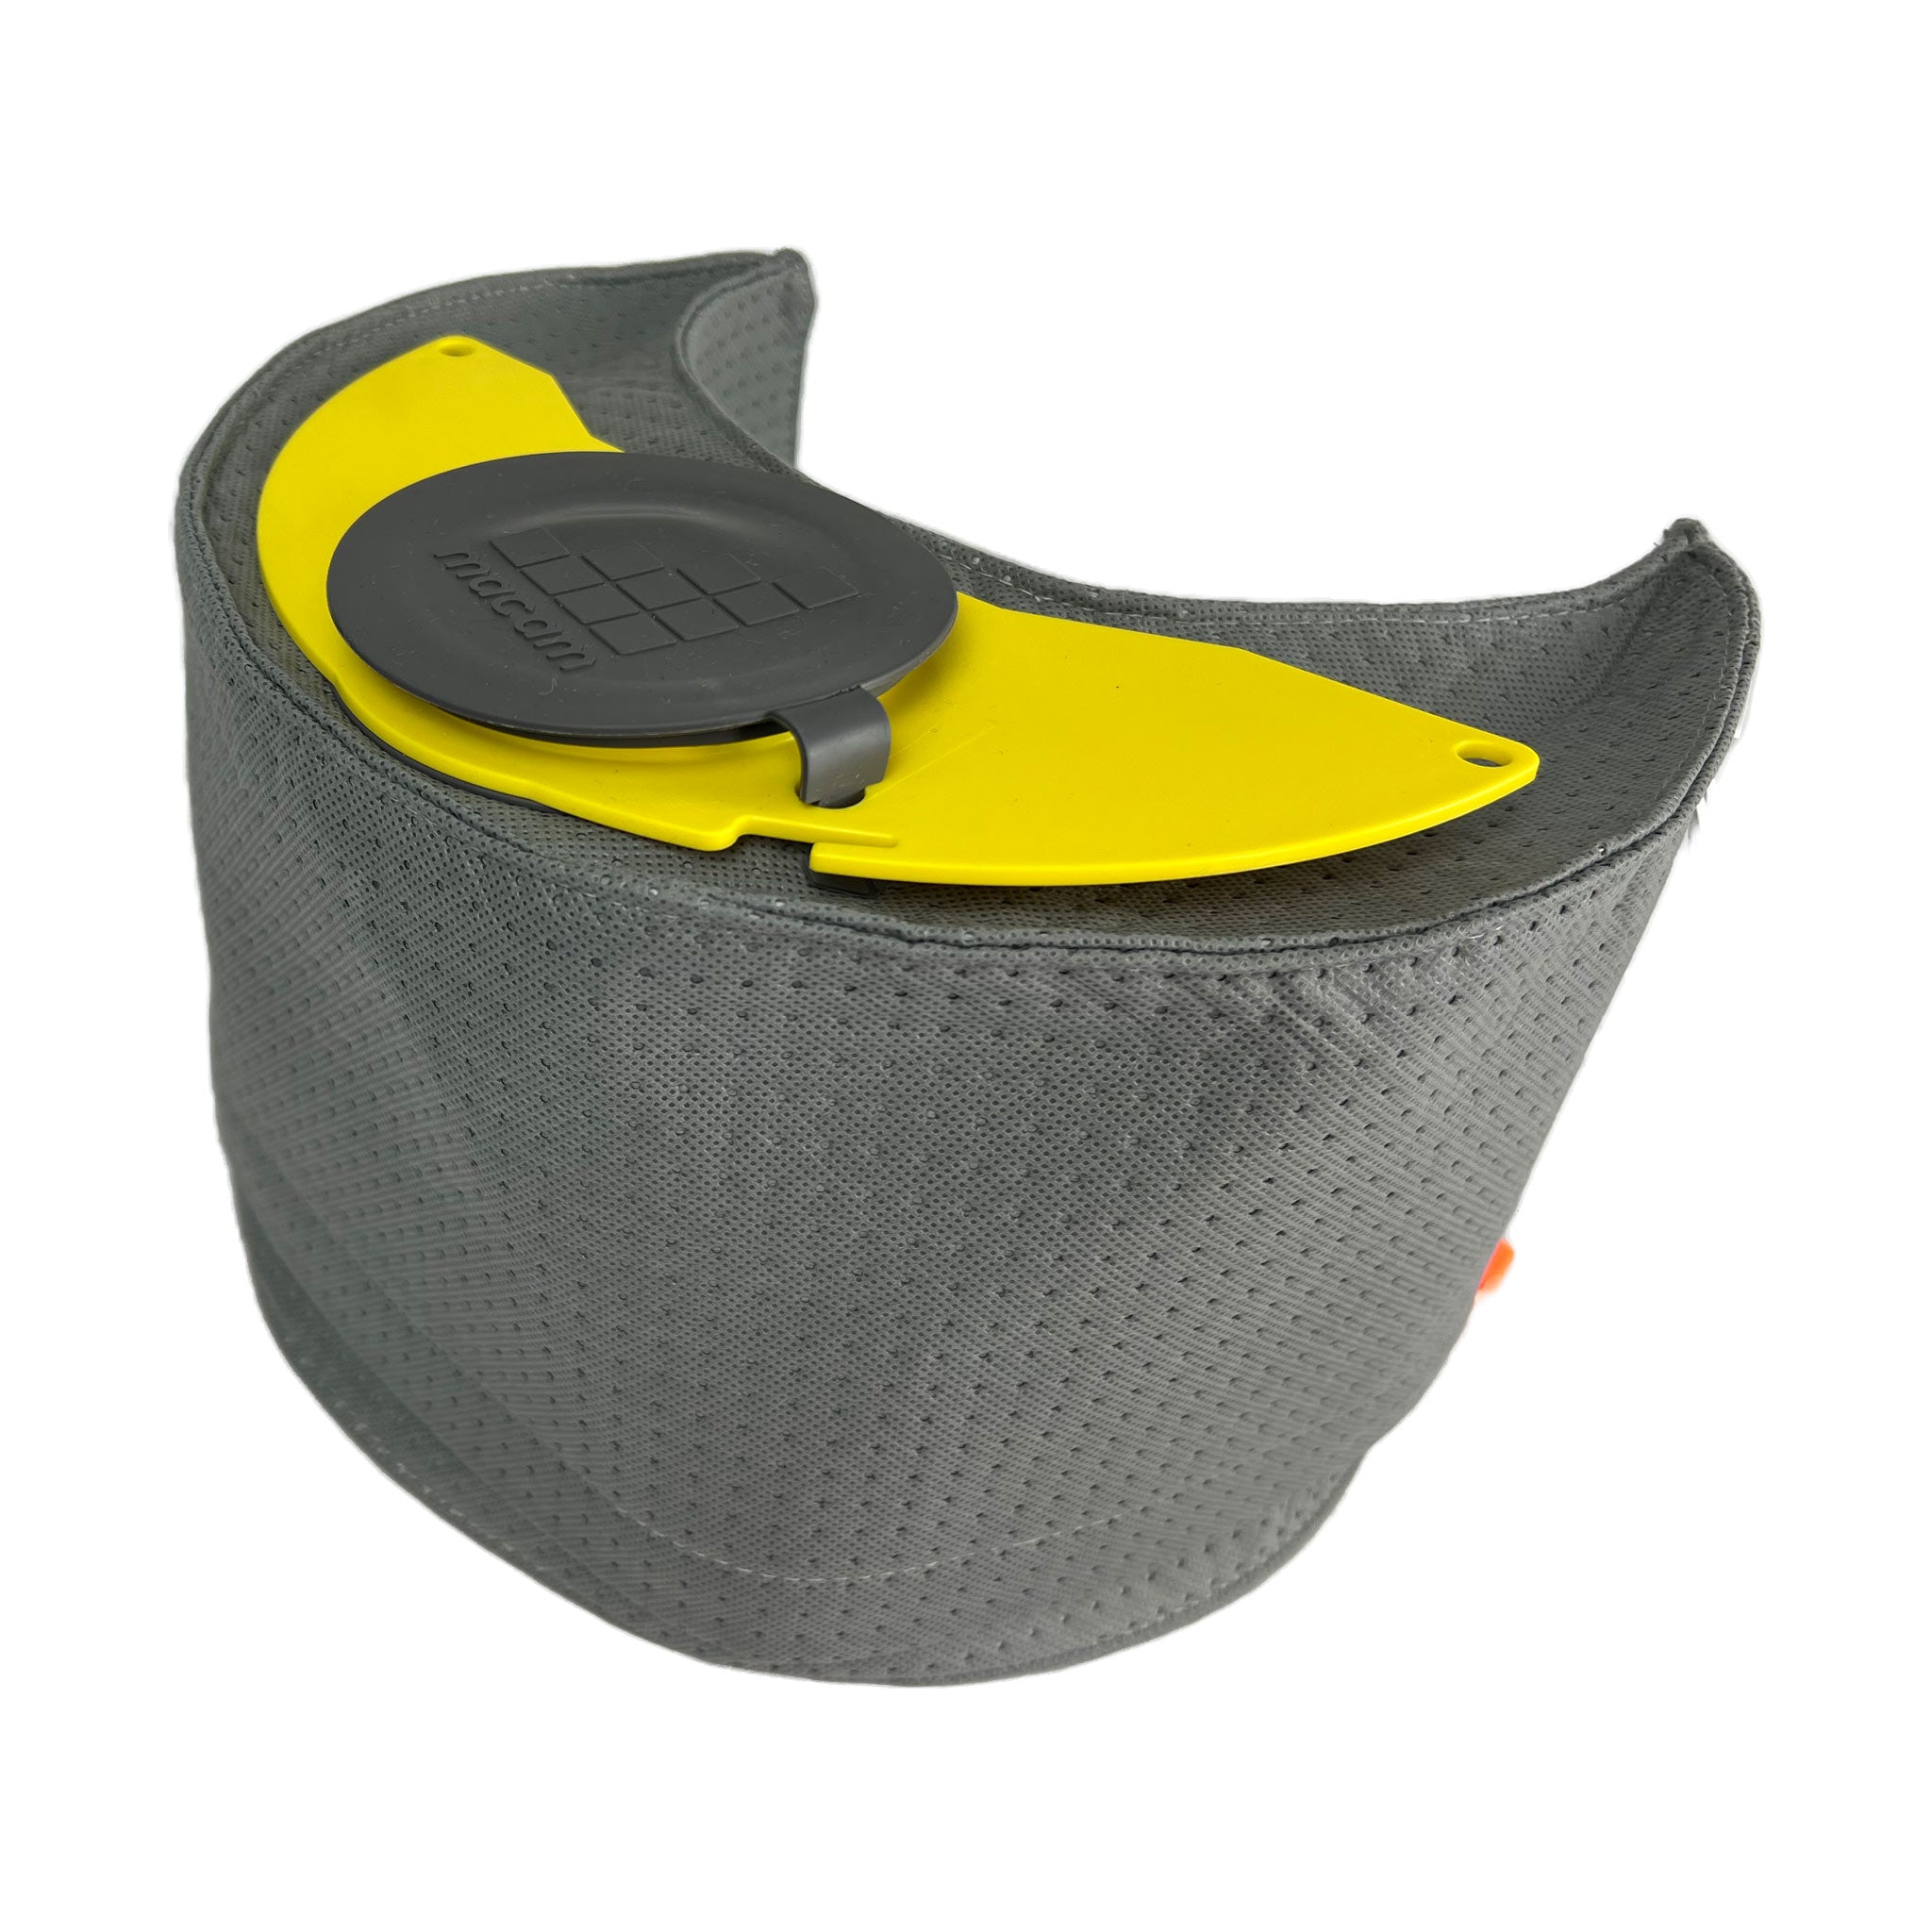 Reusable dust bag for Karcher WD2 vacuum cleaners